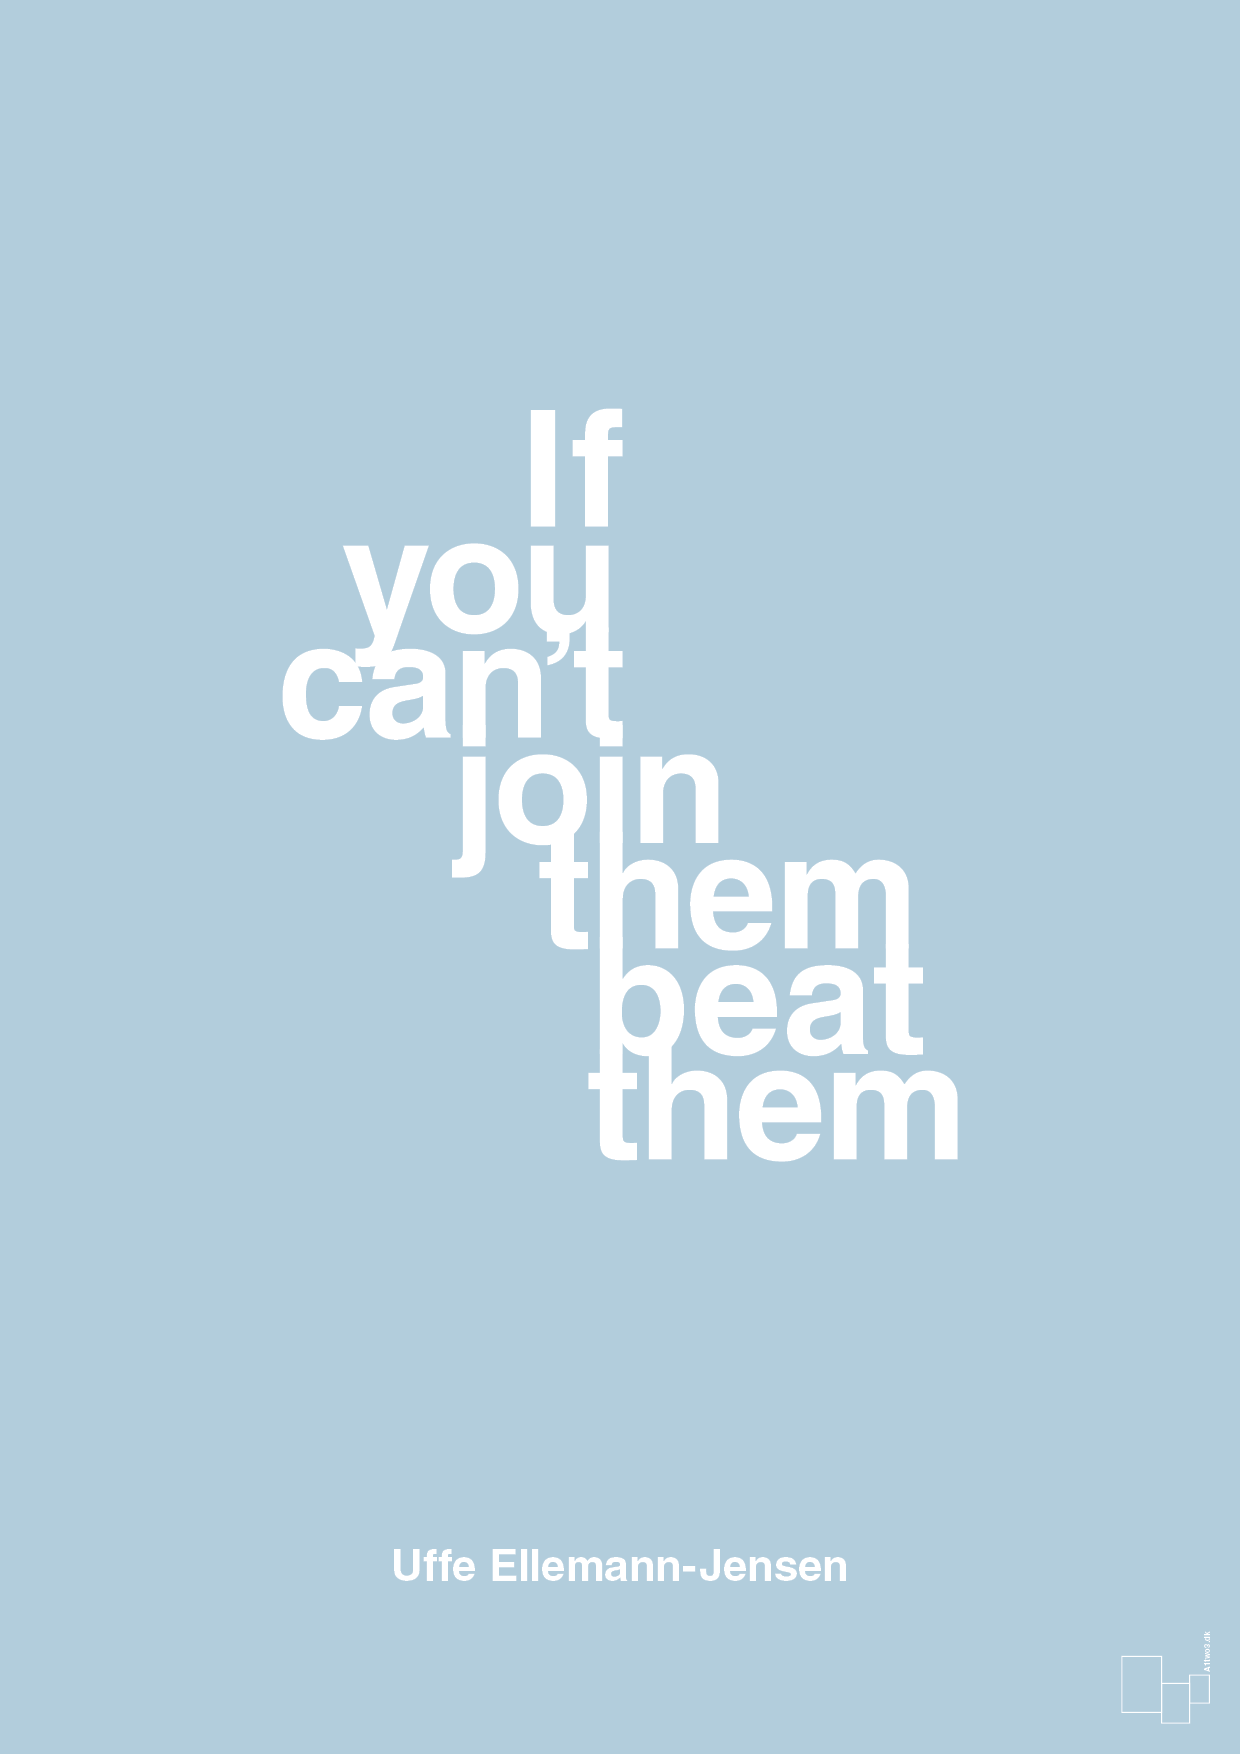 if you cant join them beat them - Plakat med Citater i Heavenly Blue